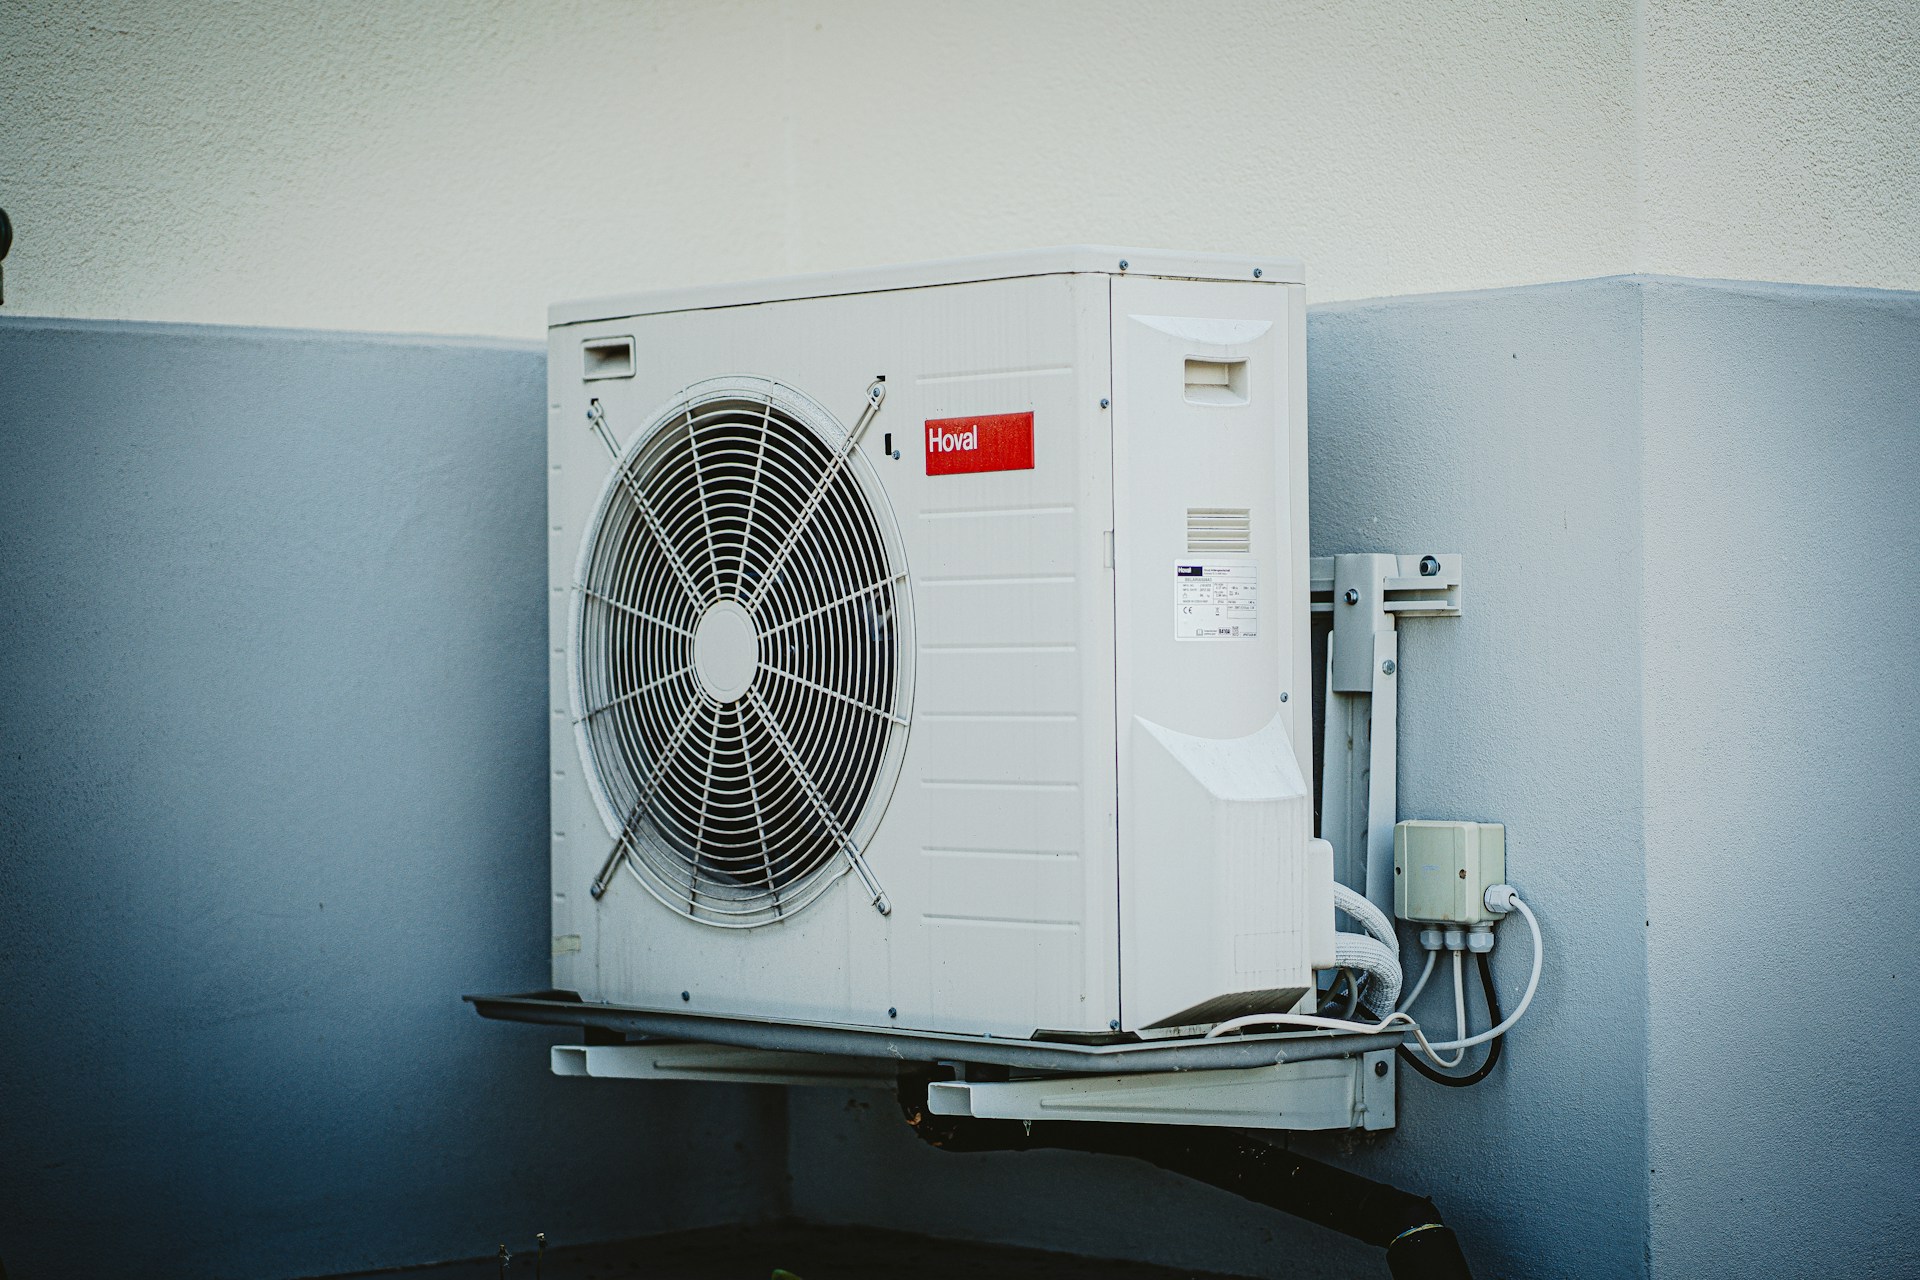 Smart Air Conditioning Systems: Integrating Tech for Comfort and Convenience